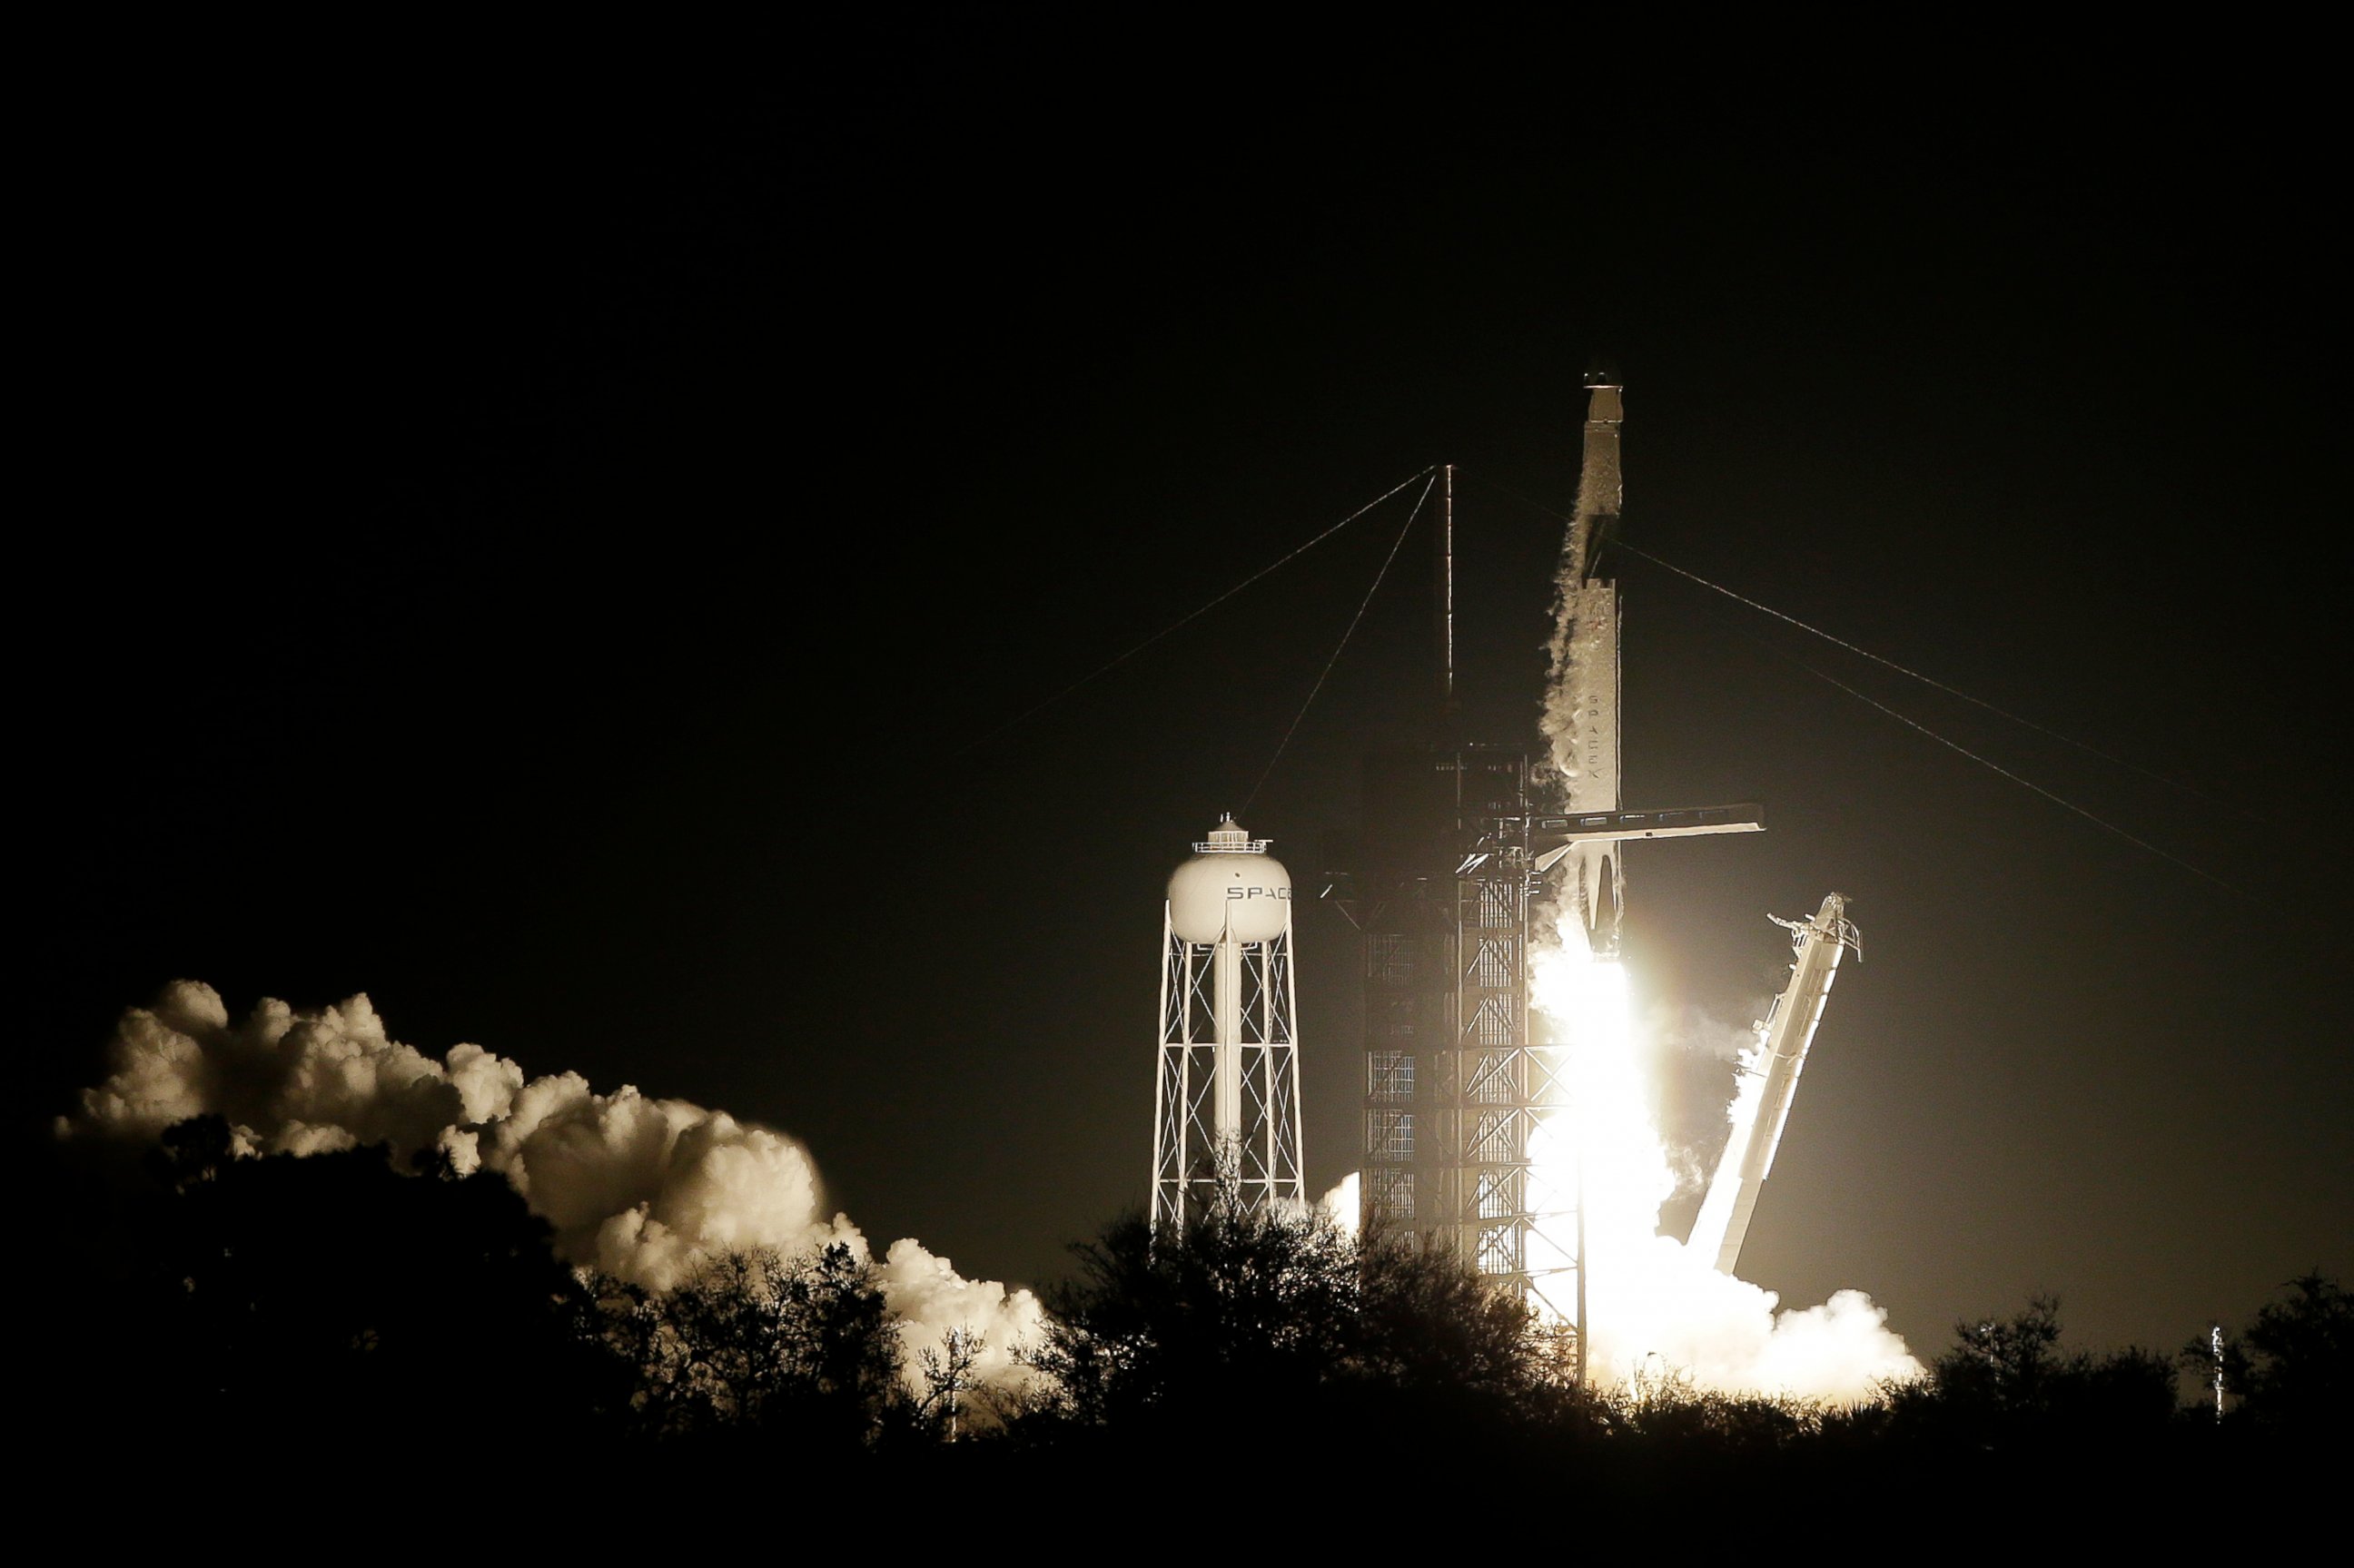 PHOTO: A SpaceX Falcon 9 rocket with the Demo 1 crew capsule lifts off on Saturday, March 2, 2019, in Cape Canaveral, Florida. (AP Photo/Terry Renna)